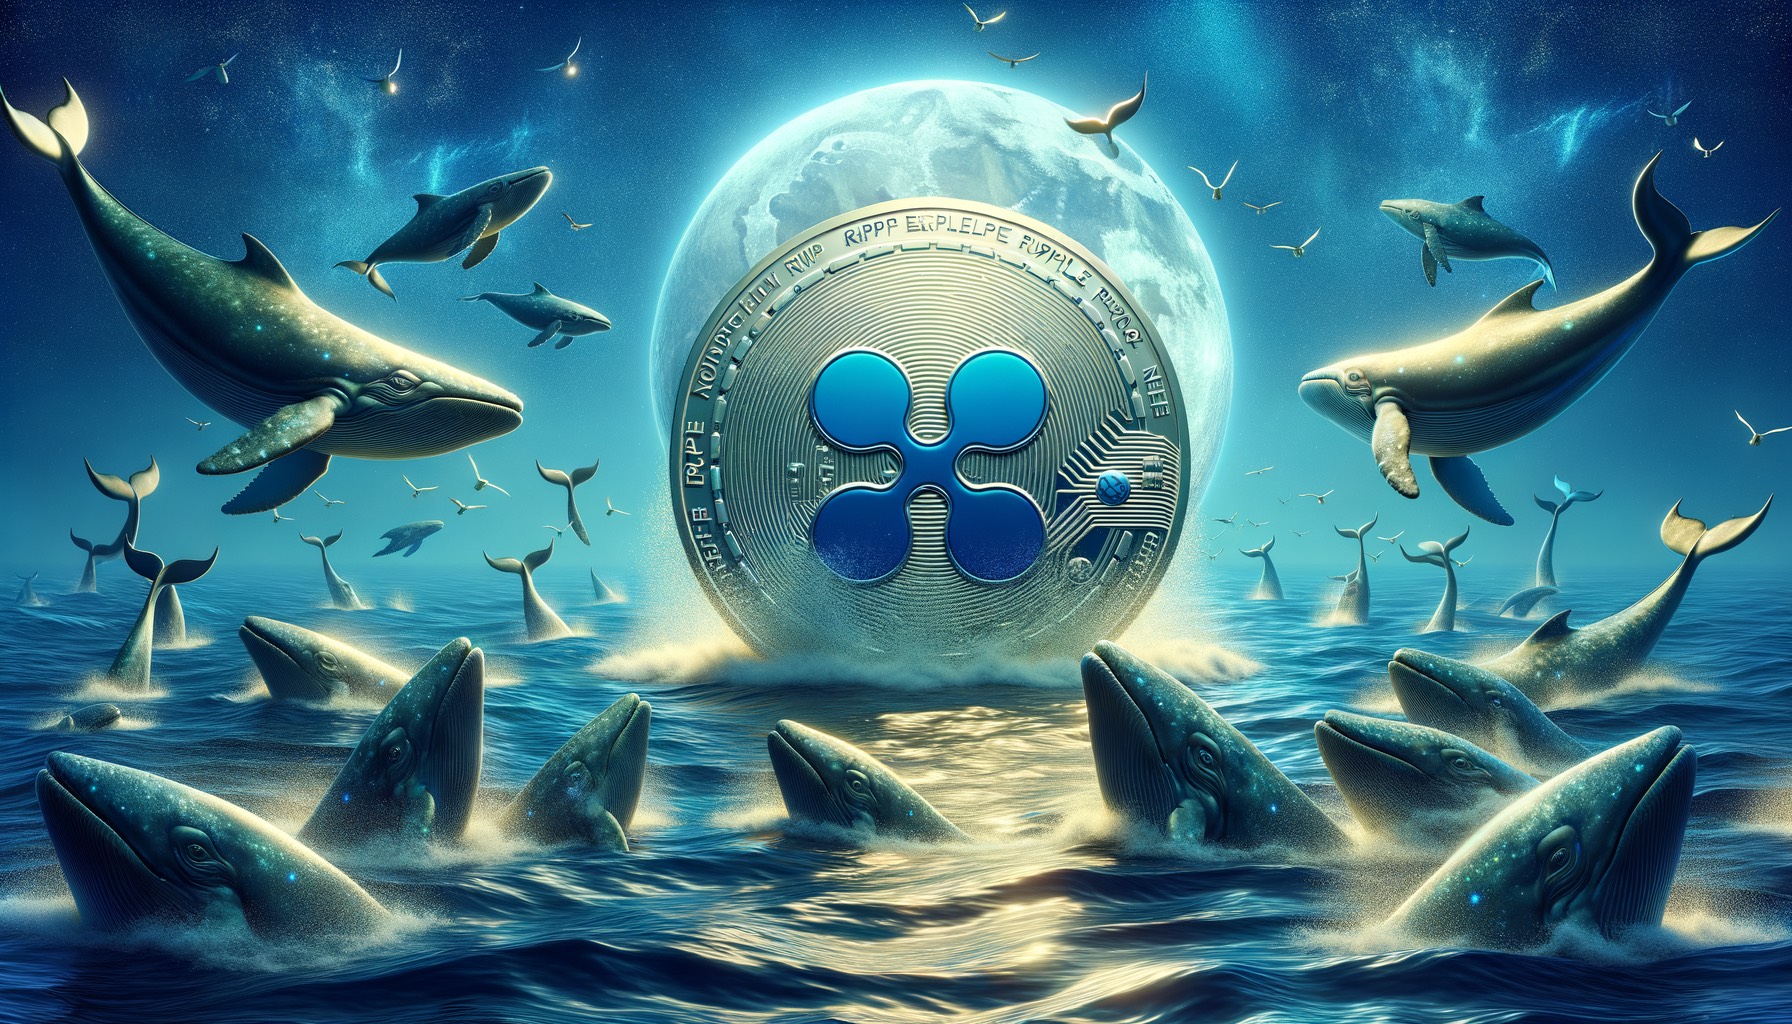 Ripple Bounces Back to $0.52 as Whales Grab $55M in XRP